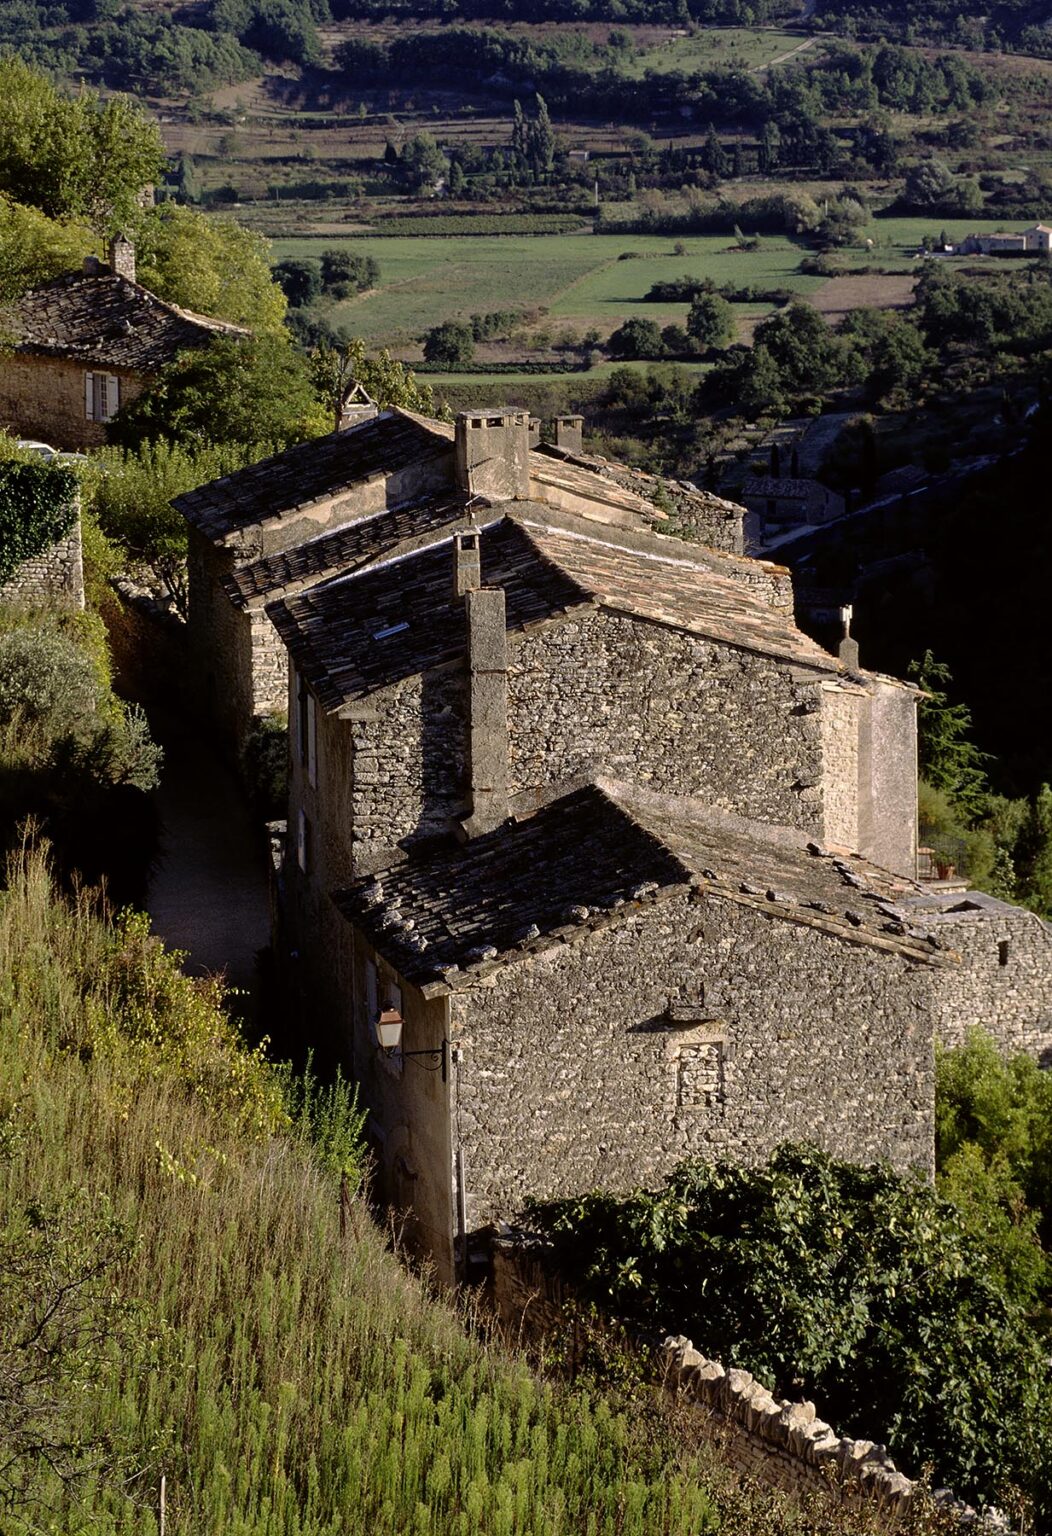 Stone houses and agricultural land of GORDES  - PROVENCE, FRANCE